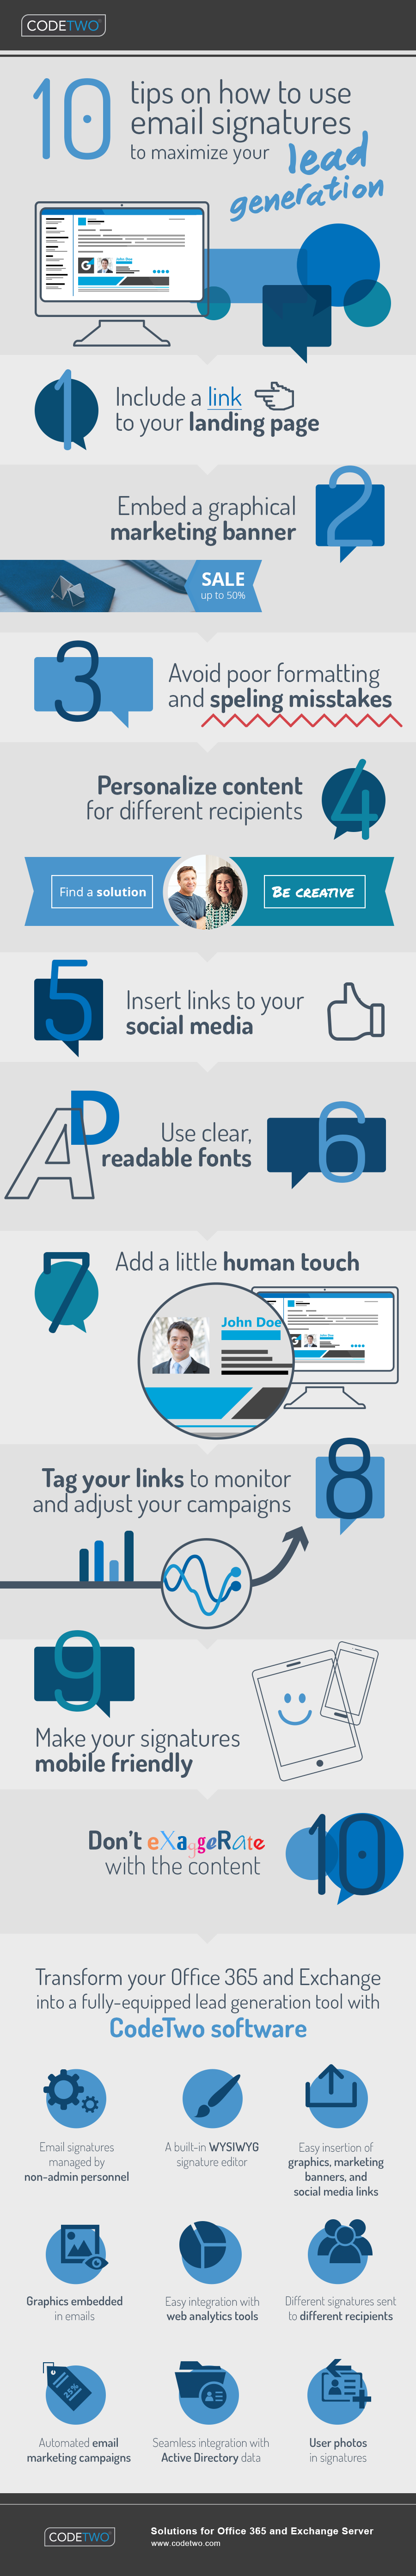 10 tips on how to use email signatures to maximize your lead generation | Infographic